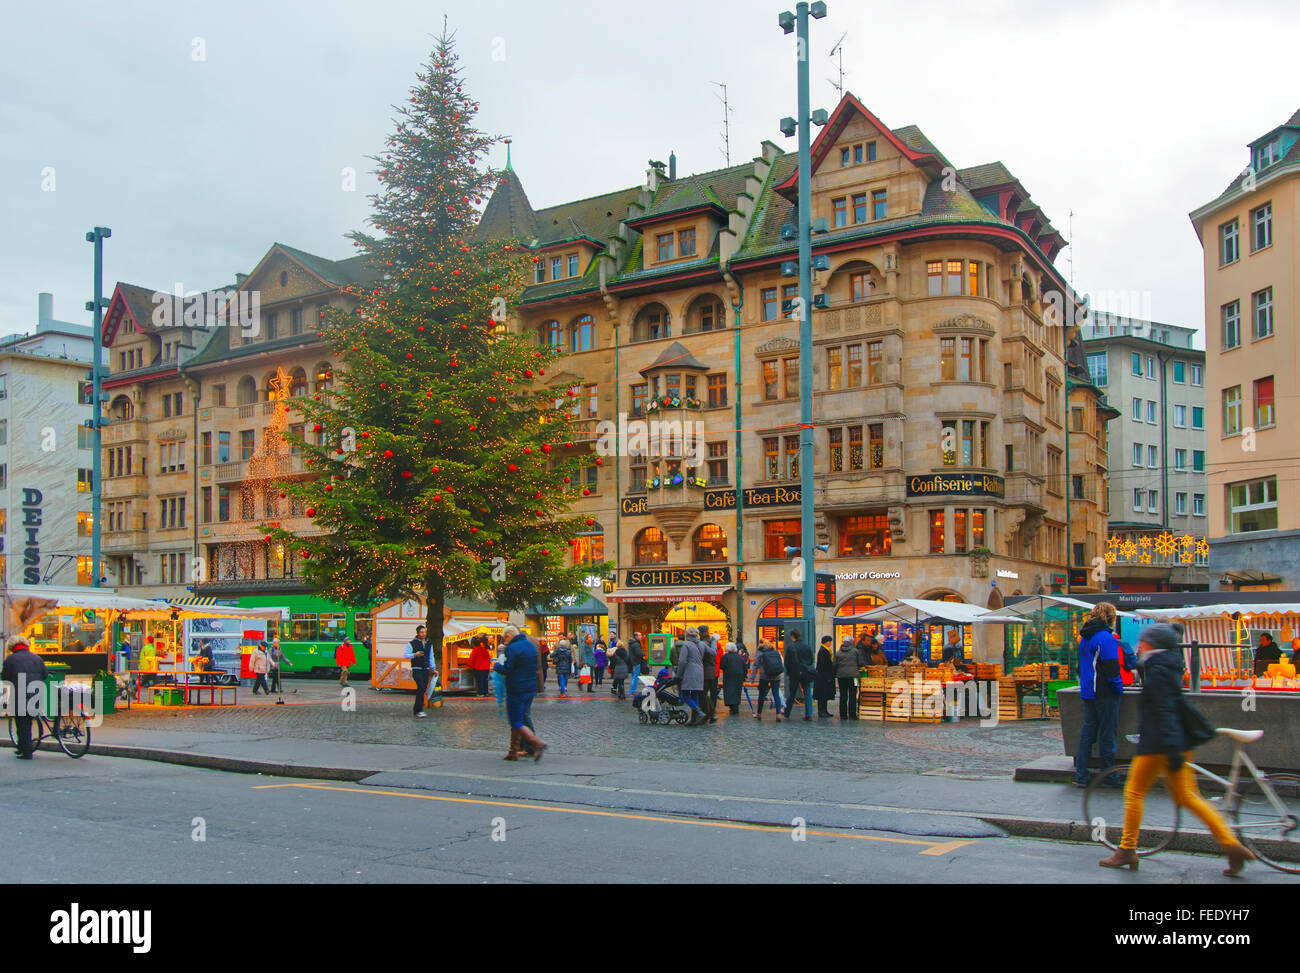 BASEL, SWITZERLAND - JANUARY 1, 2014: Street view of Marktplatz in the Old City of Basel. Basel is a third most populous city in Switzerland. It is located on the river Rhine. Stock Photo